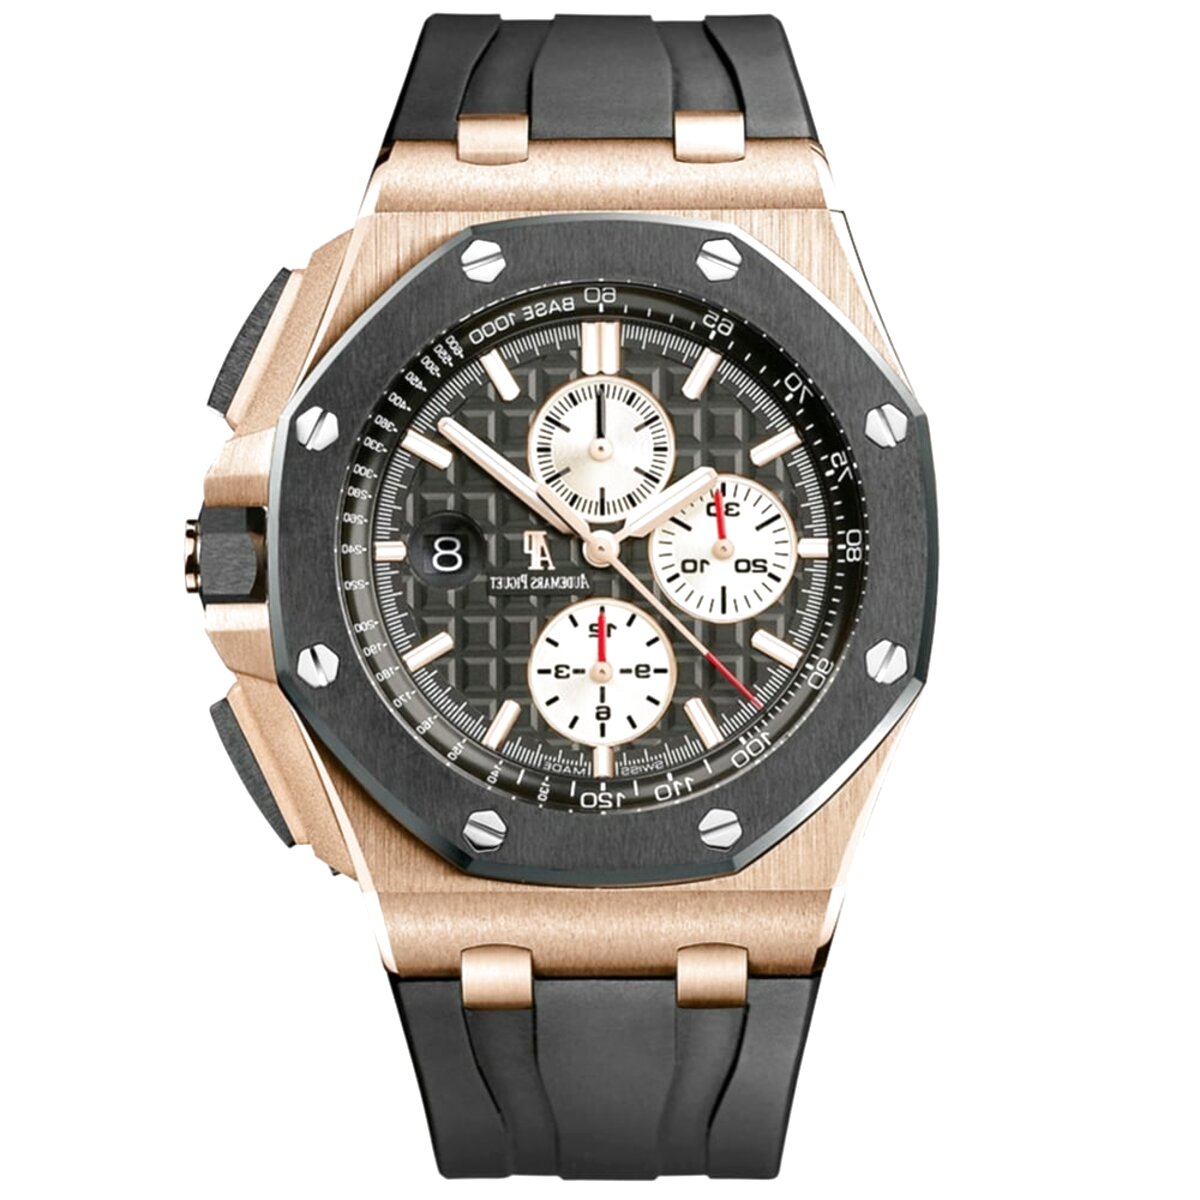 Ap Watch Royal Oak Offshore for sale in UK | View 56 ads